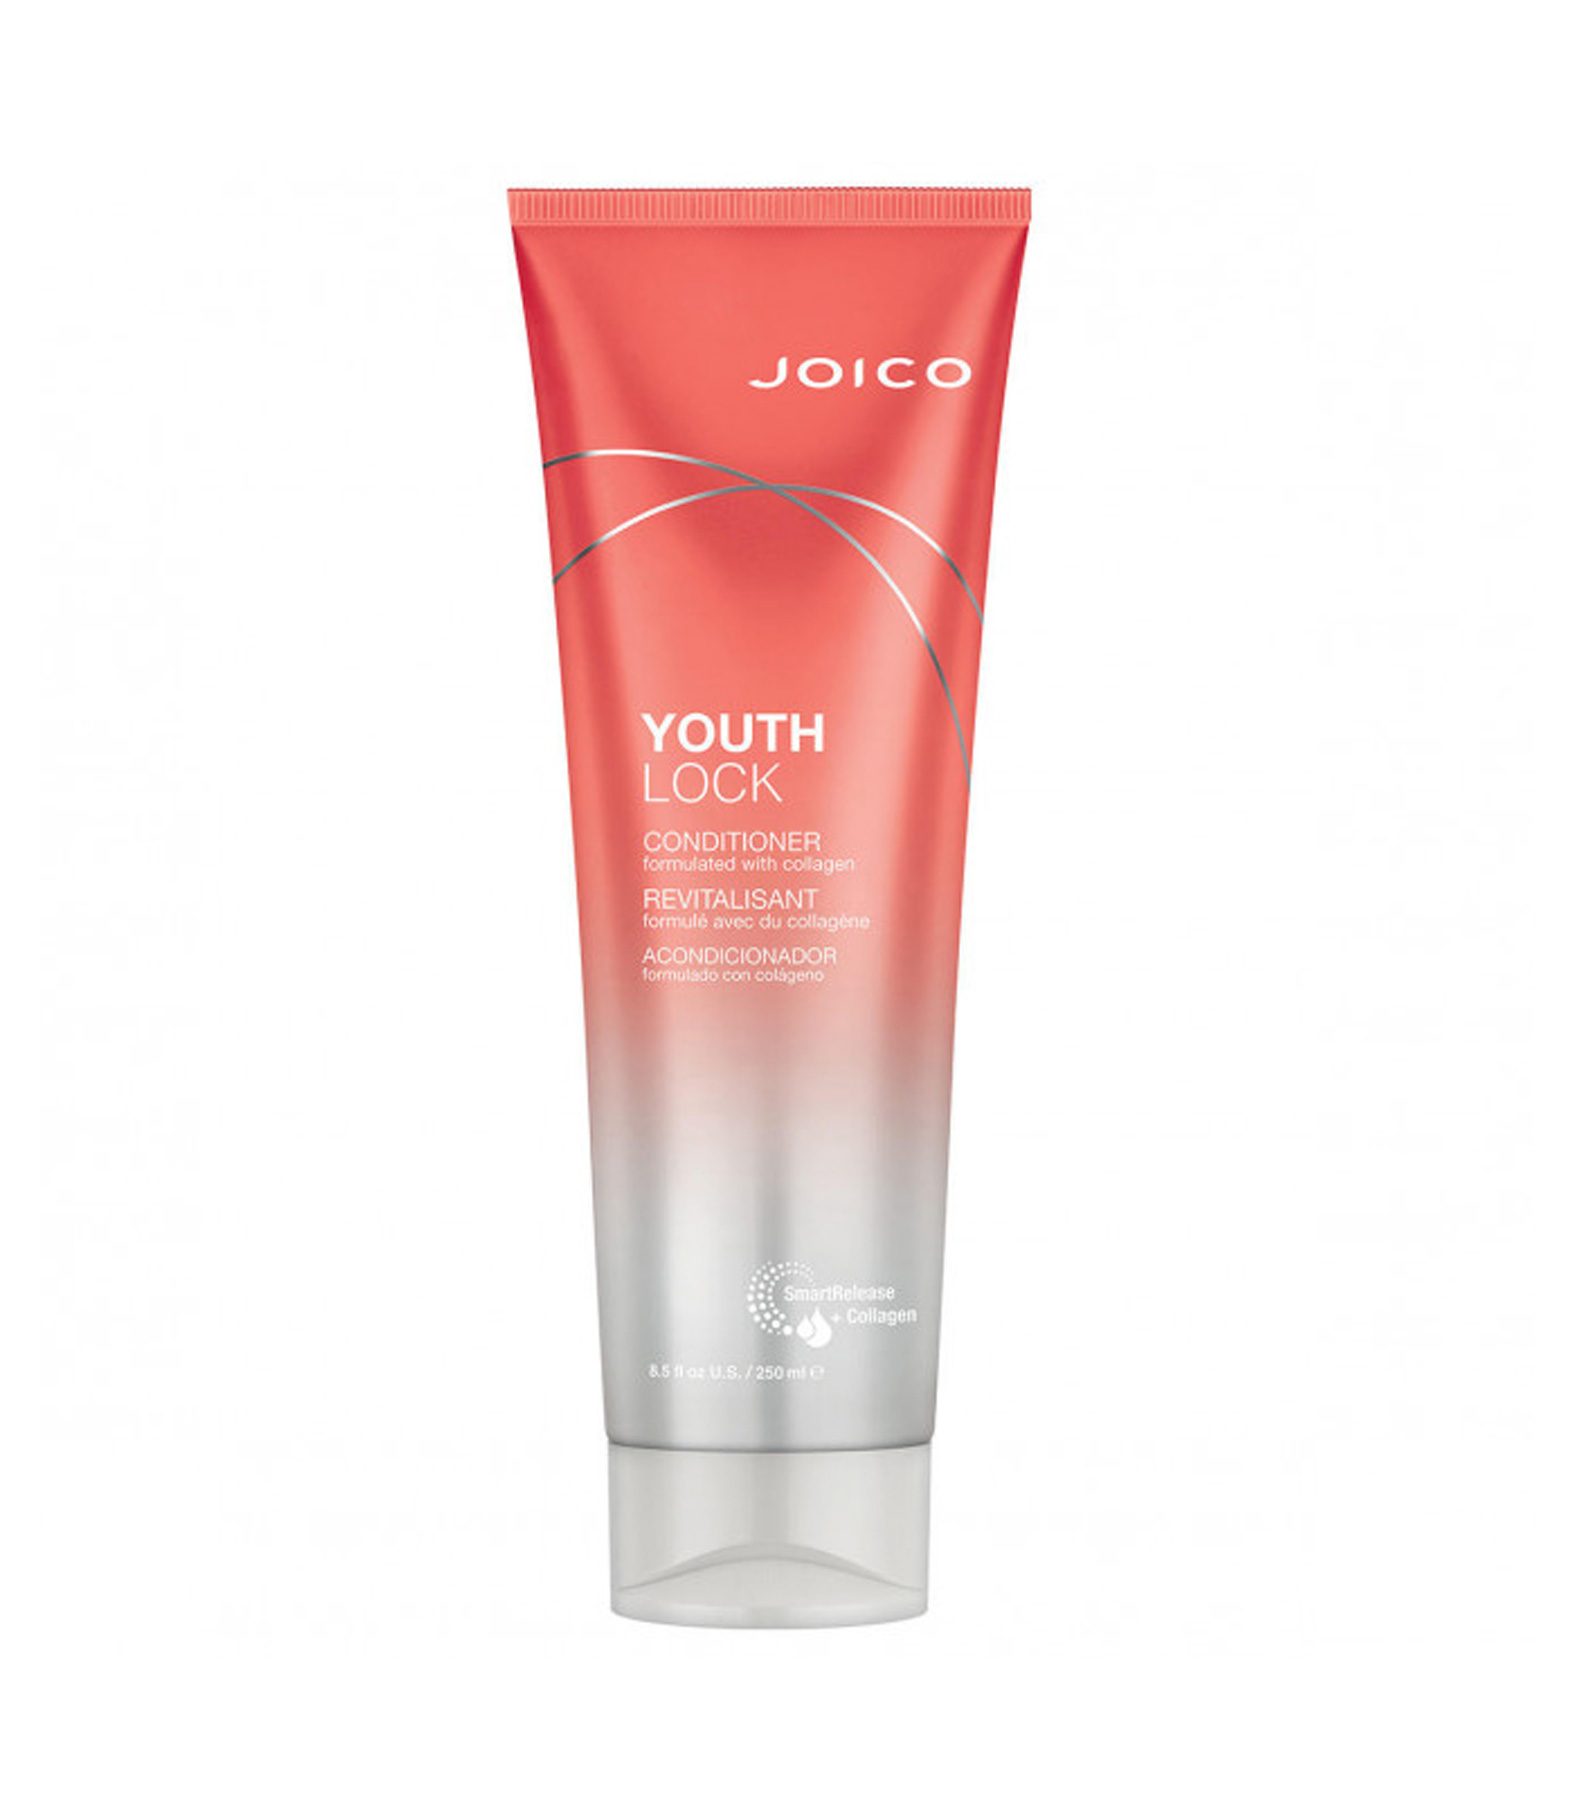 JOICO-Youthlock-Conditioner